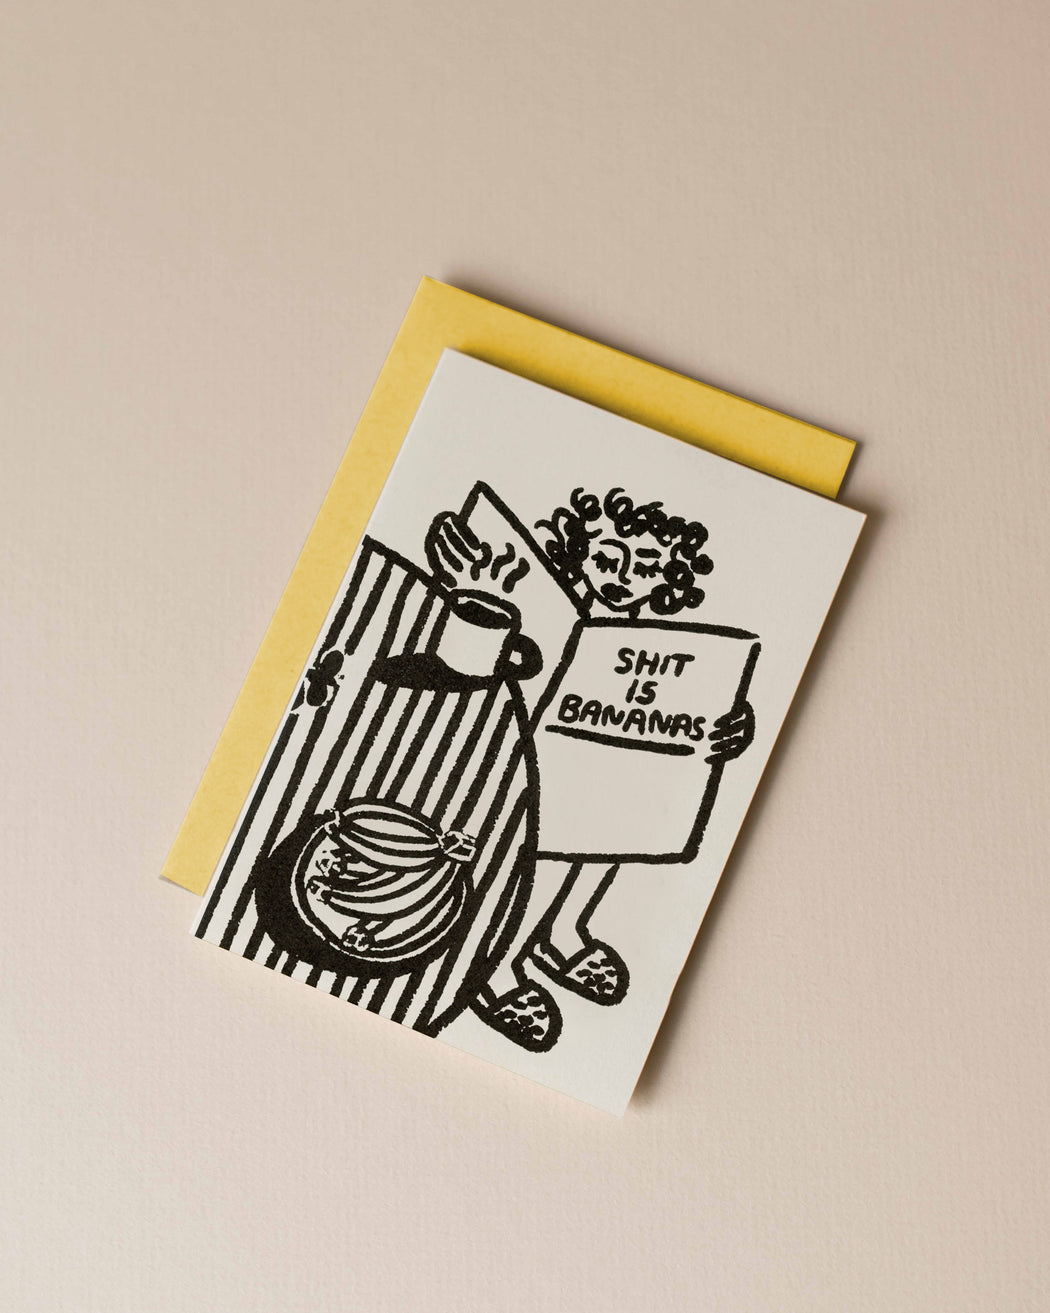 People I've Loved - Shit Is Bananas Card